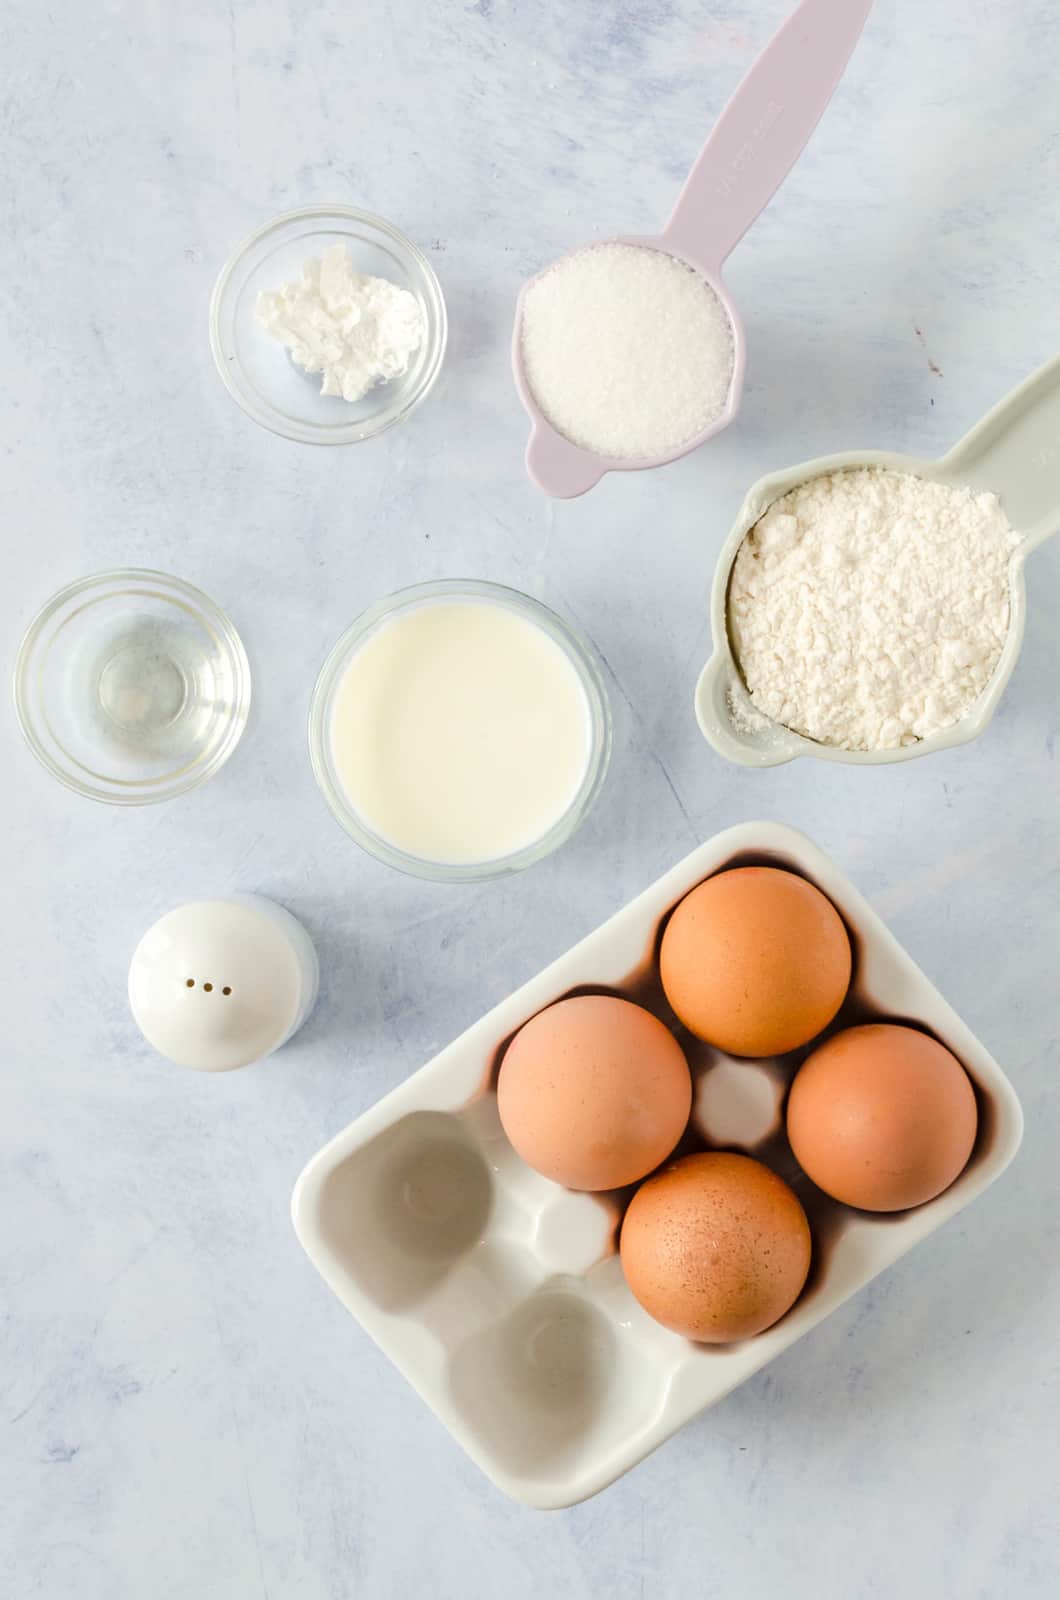 Ingredients needed to make Soufflé Pancakes